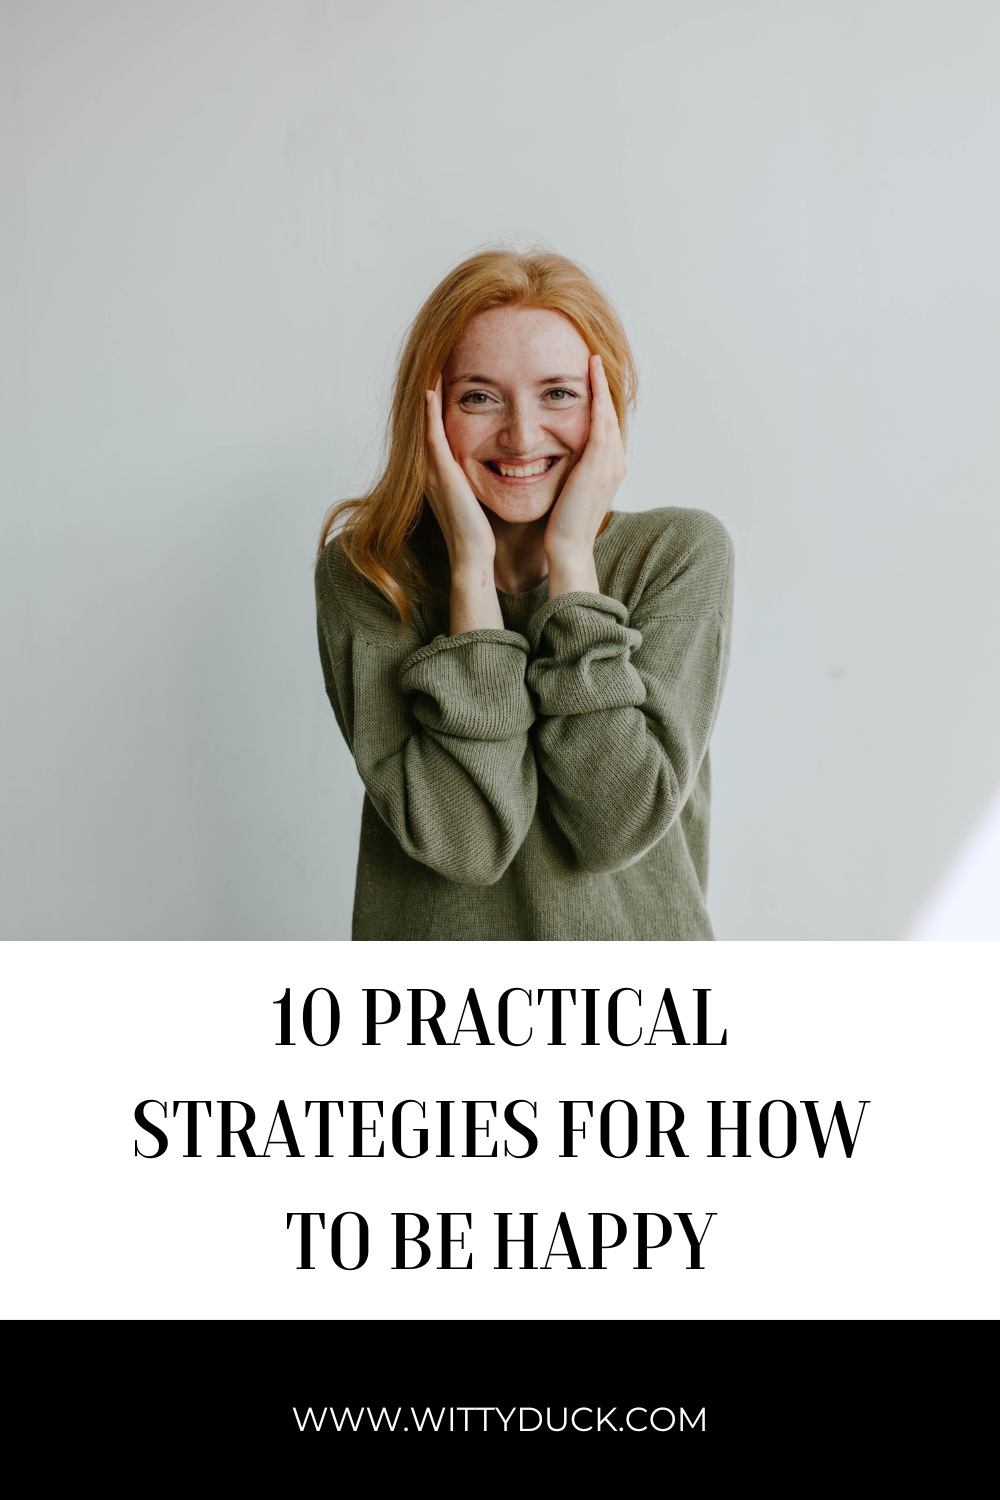 10 Practical Strategies for How to Be Happy